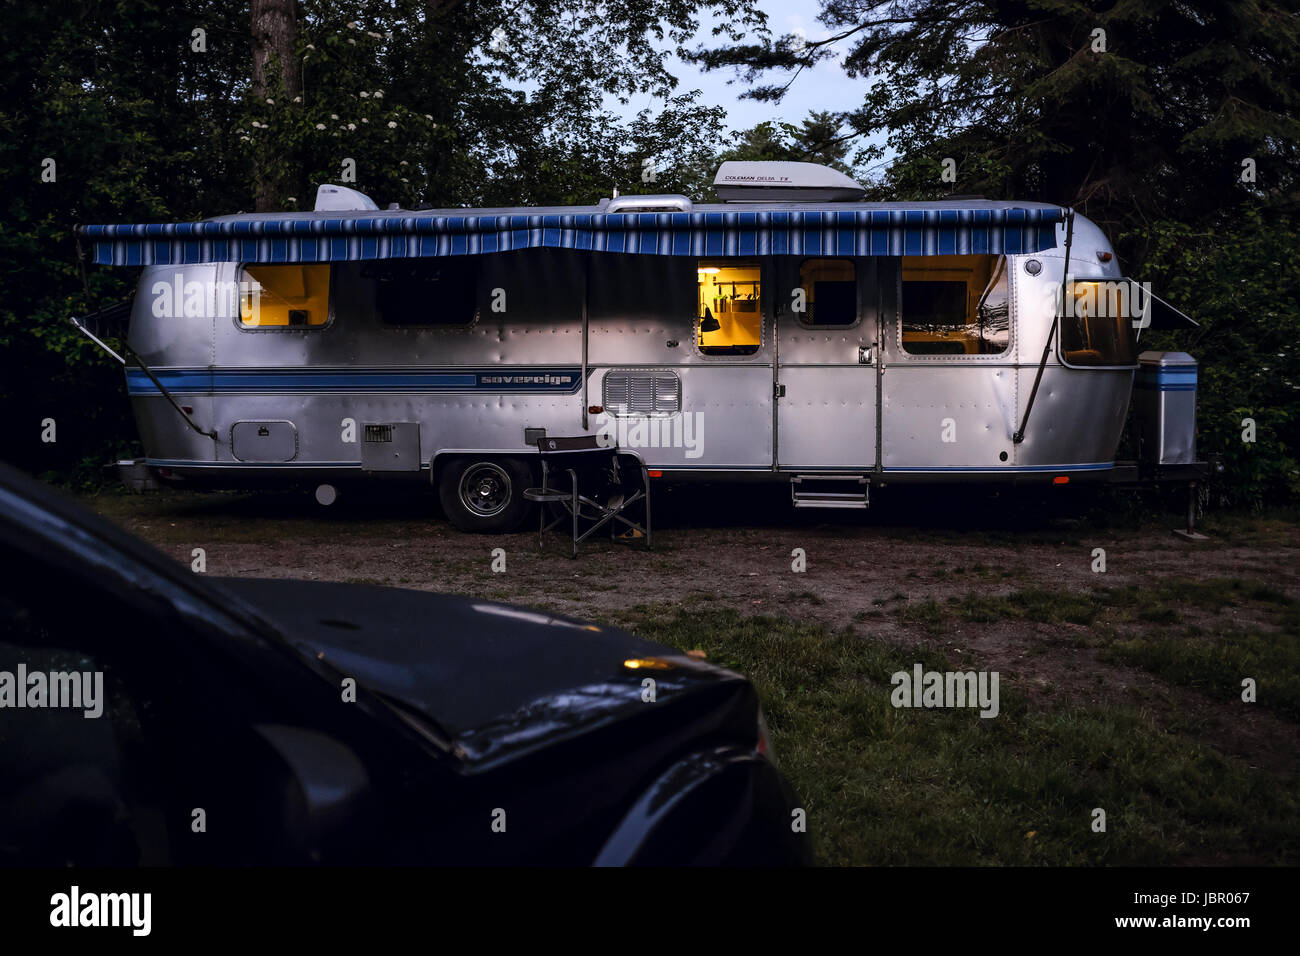 The iconic American made Airstream travel trailer sits in at a campsite in Southwestern Ontario Canada. Airstream was founded in the late 1920s. Stock Photo